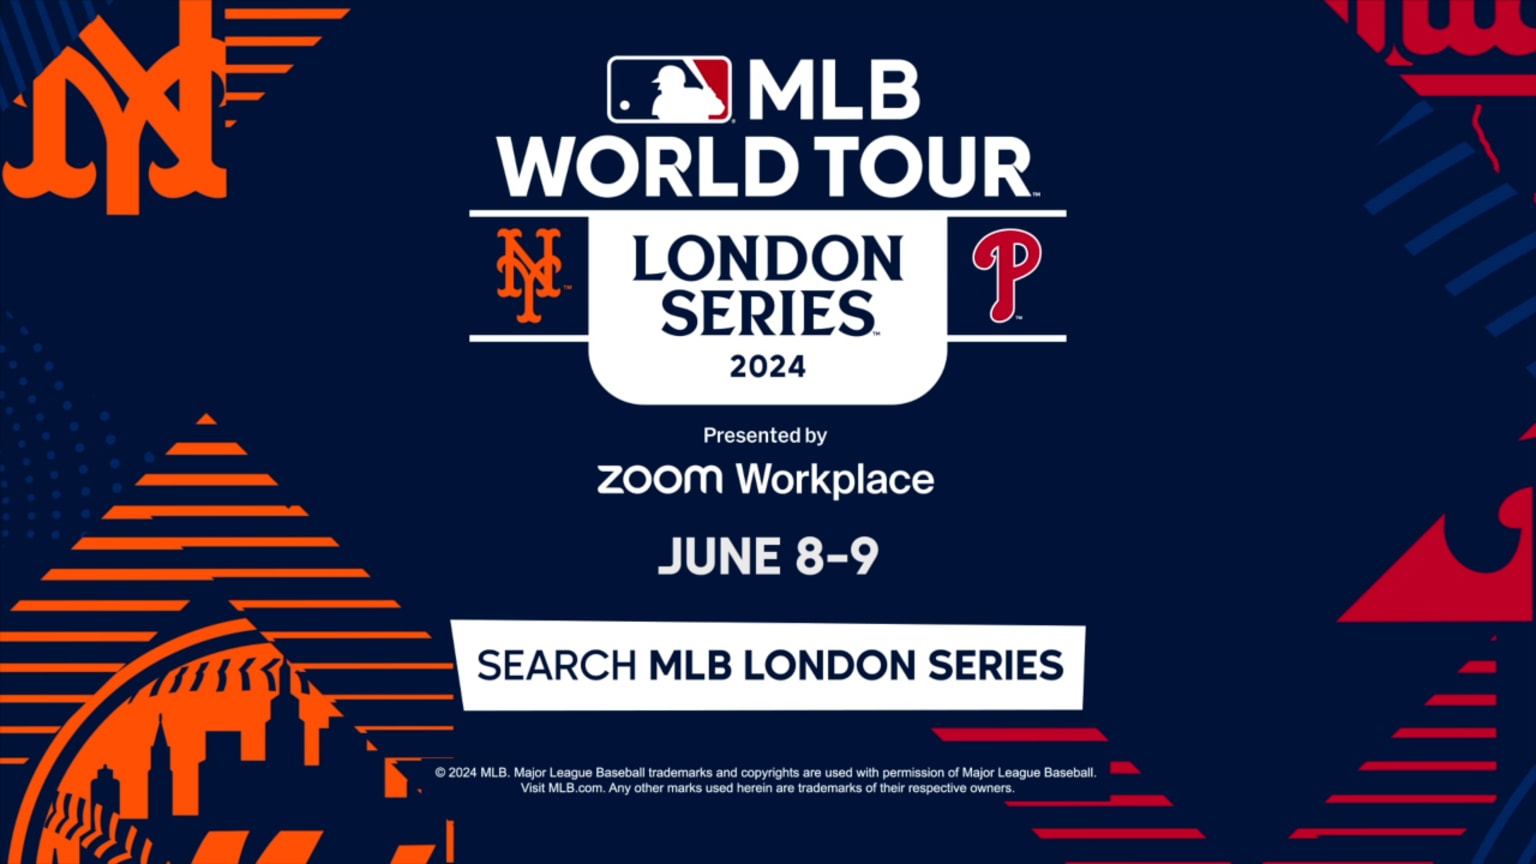 Check out the drone view of the MLB London Series 08/06/2024